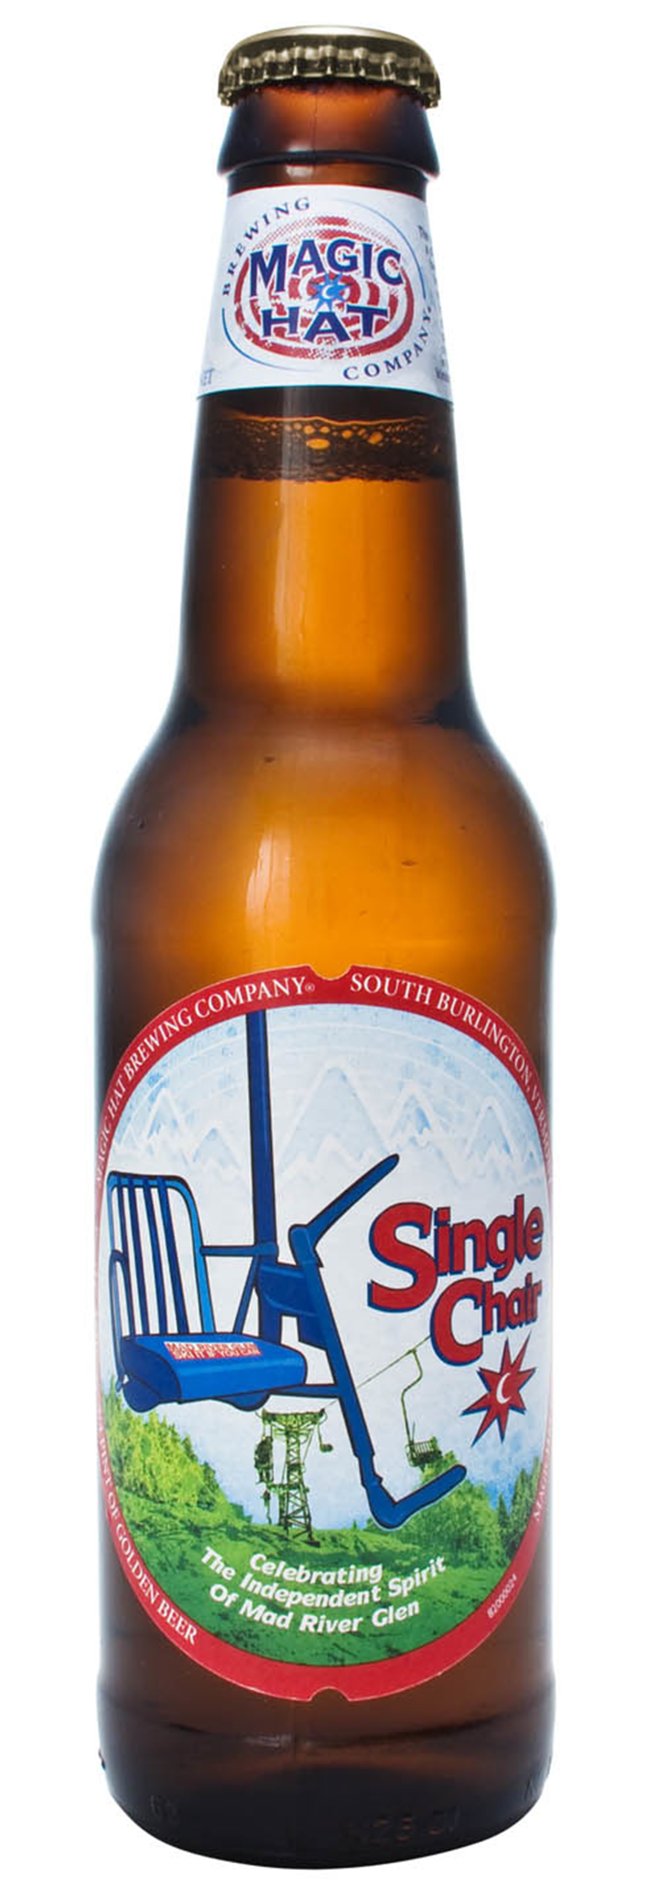 Single Chair is a light, crisp pilsner with sweet malts that's perfectly suited to combat the dog days of summer. - Magic Hat Brewing Company